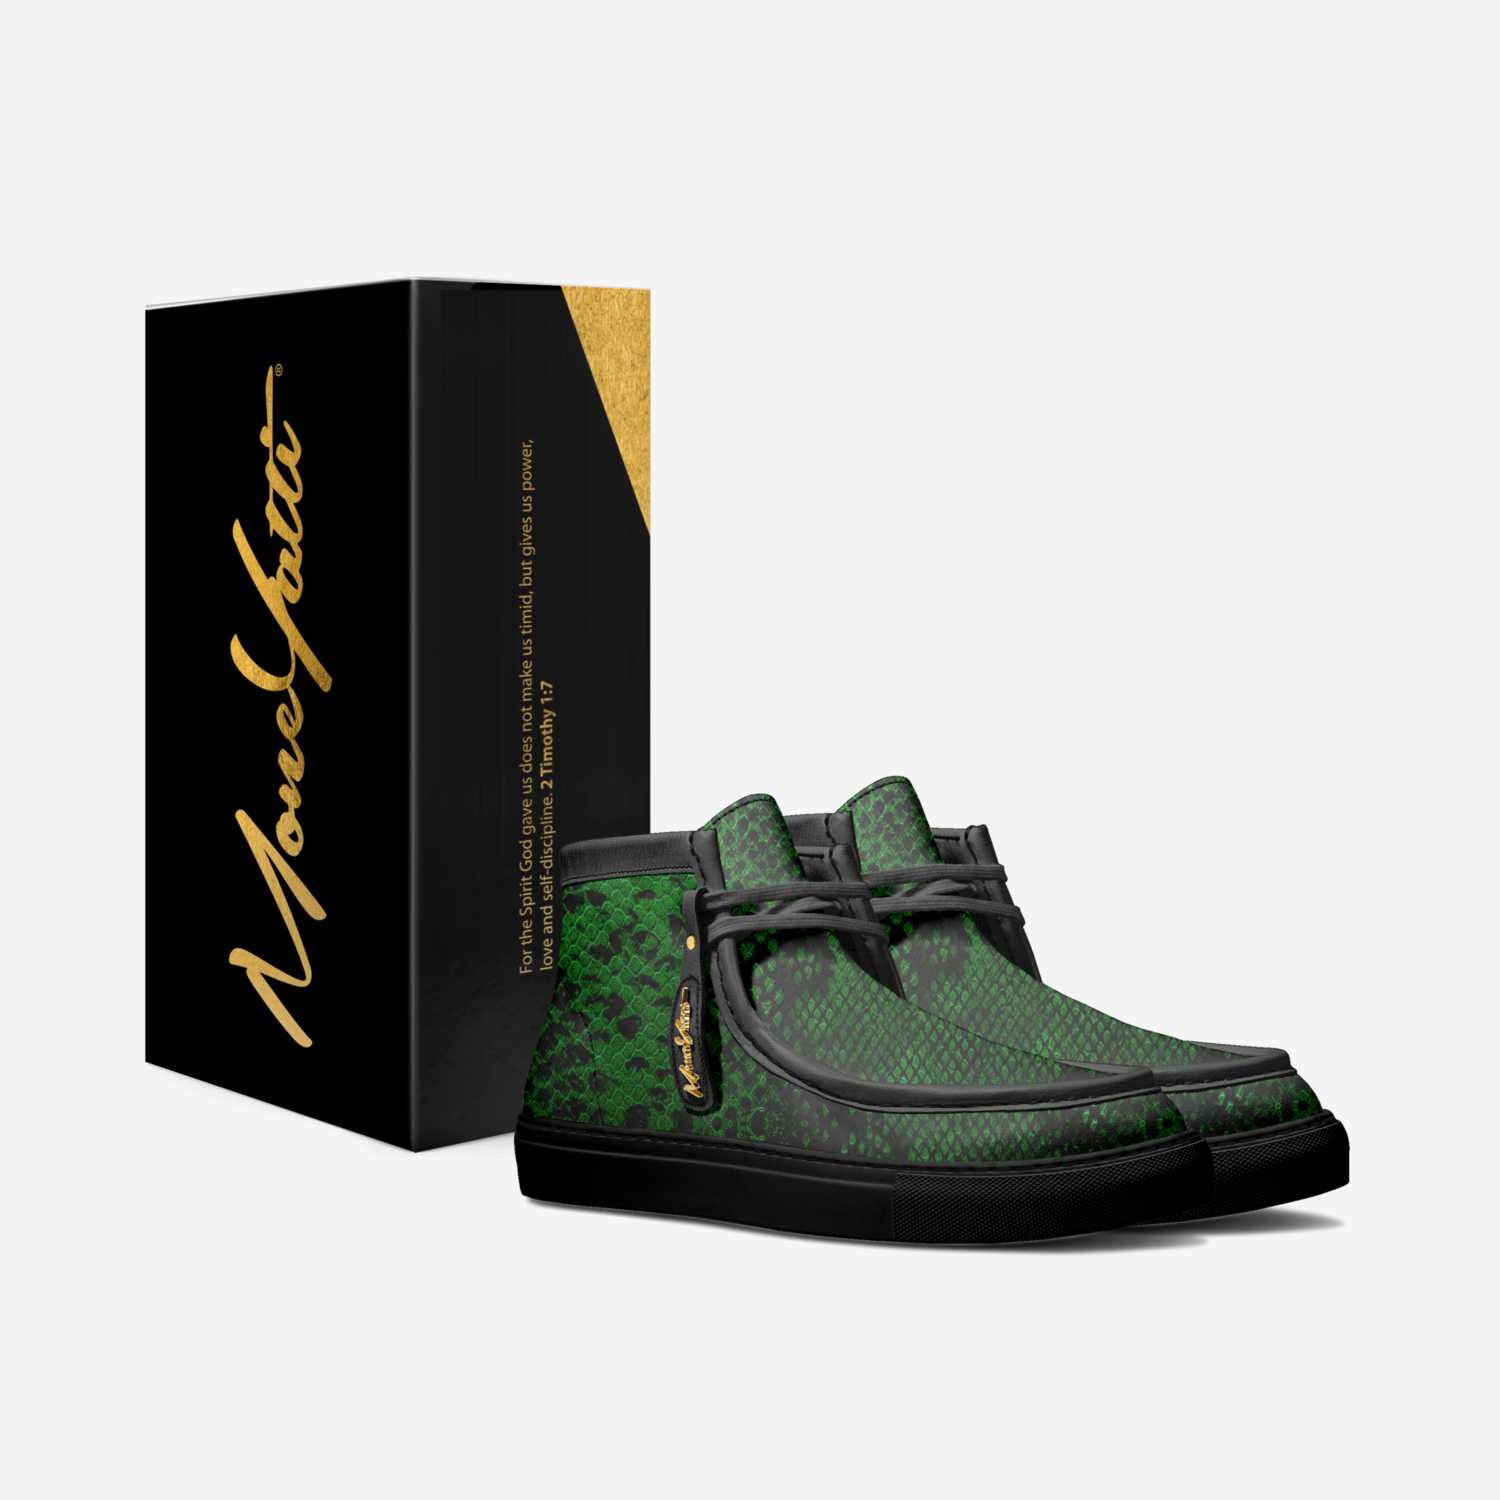 LUX 015 custom made in Italy shoes by Moneyatti Brand | Box view